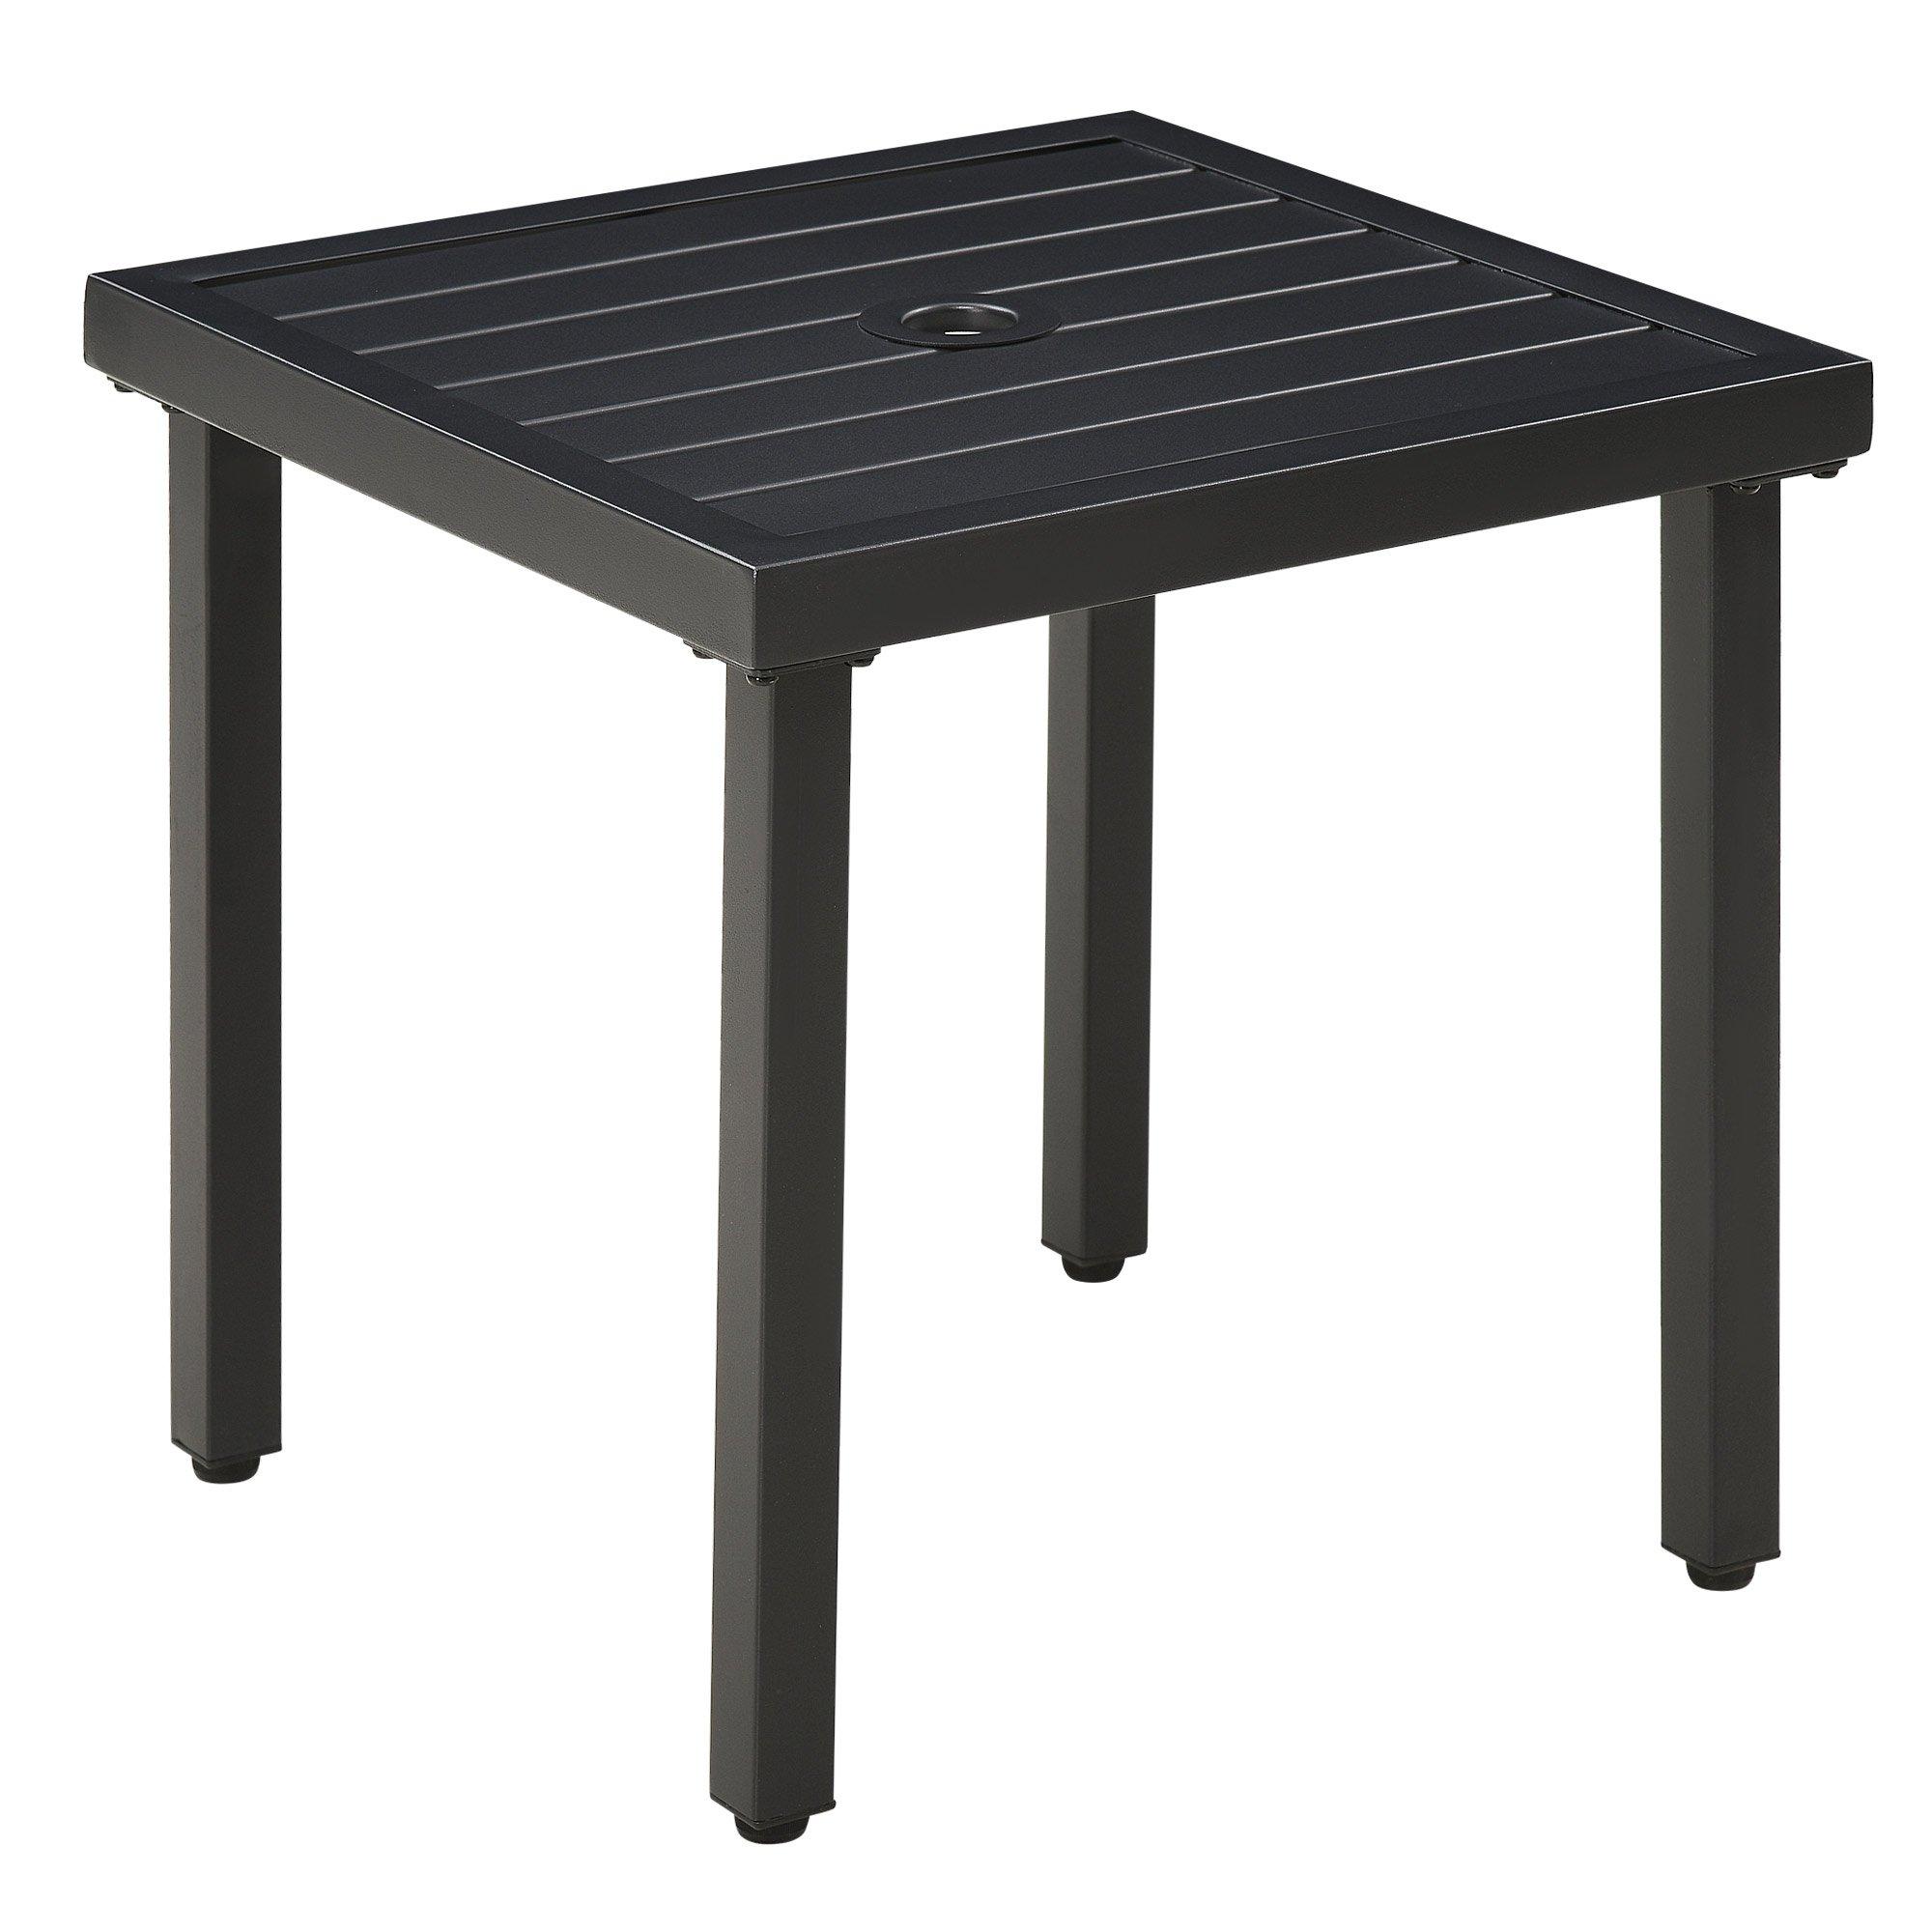 Patio End Table Garden Side Table with Umbrella Hole and Steel Frame